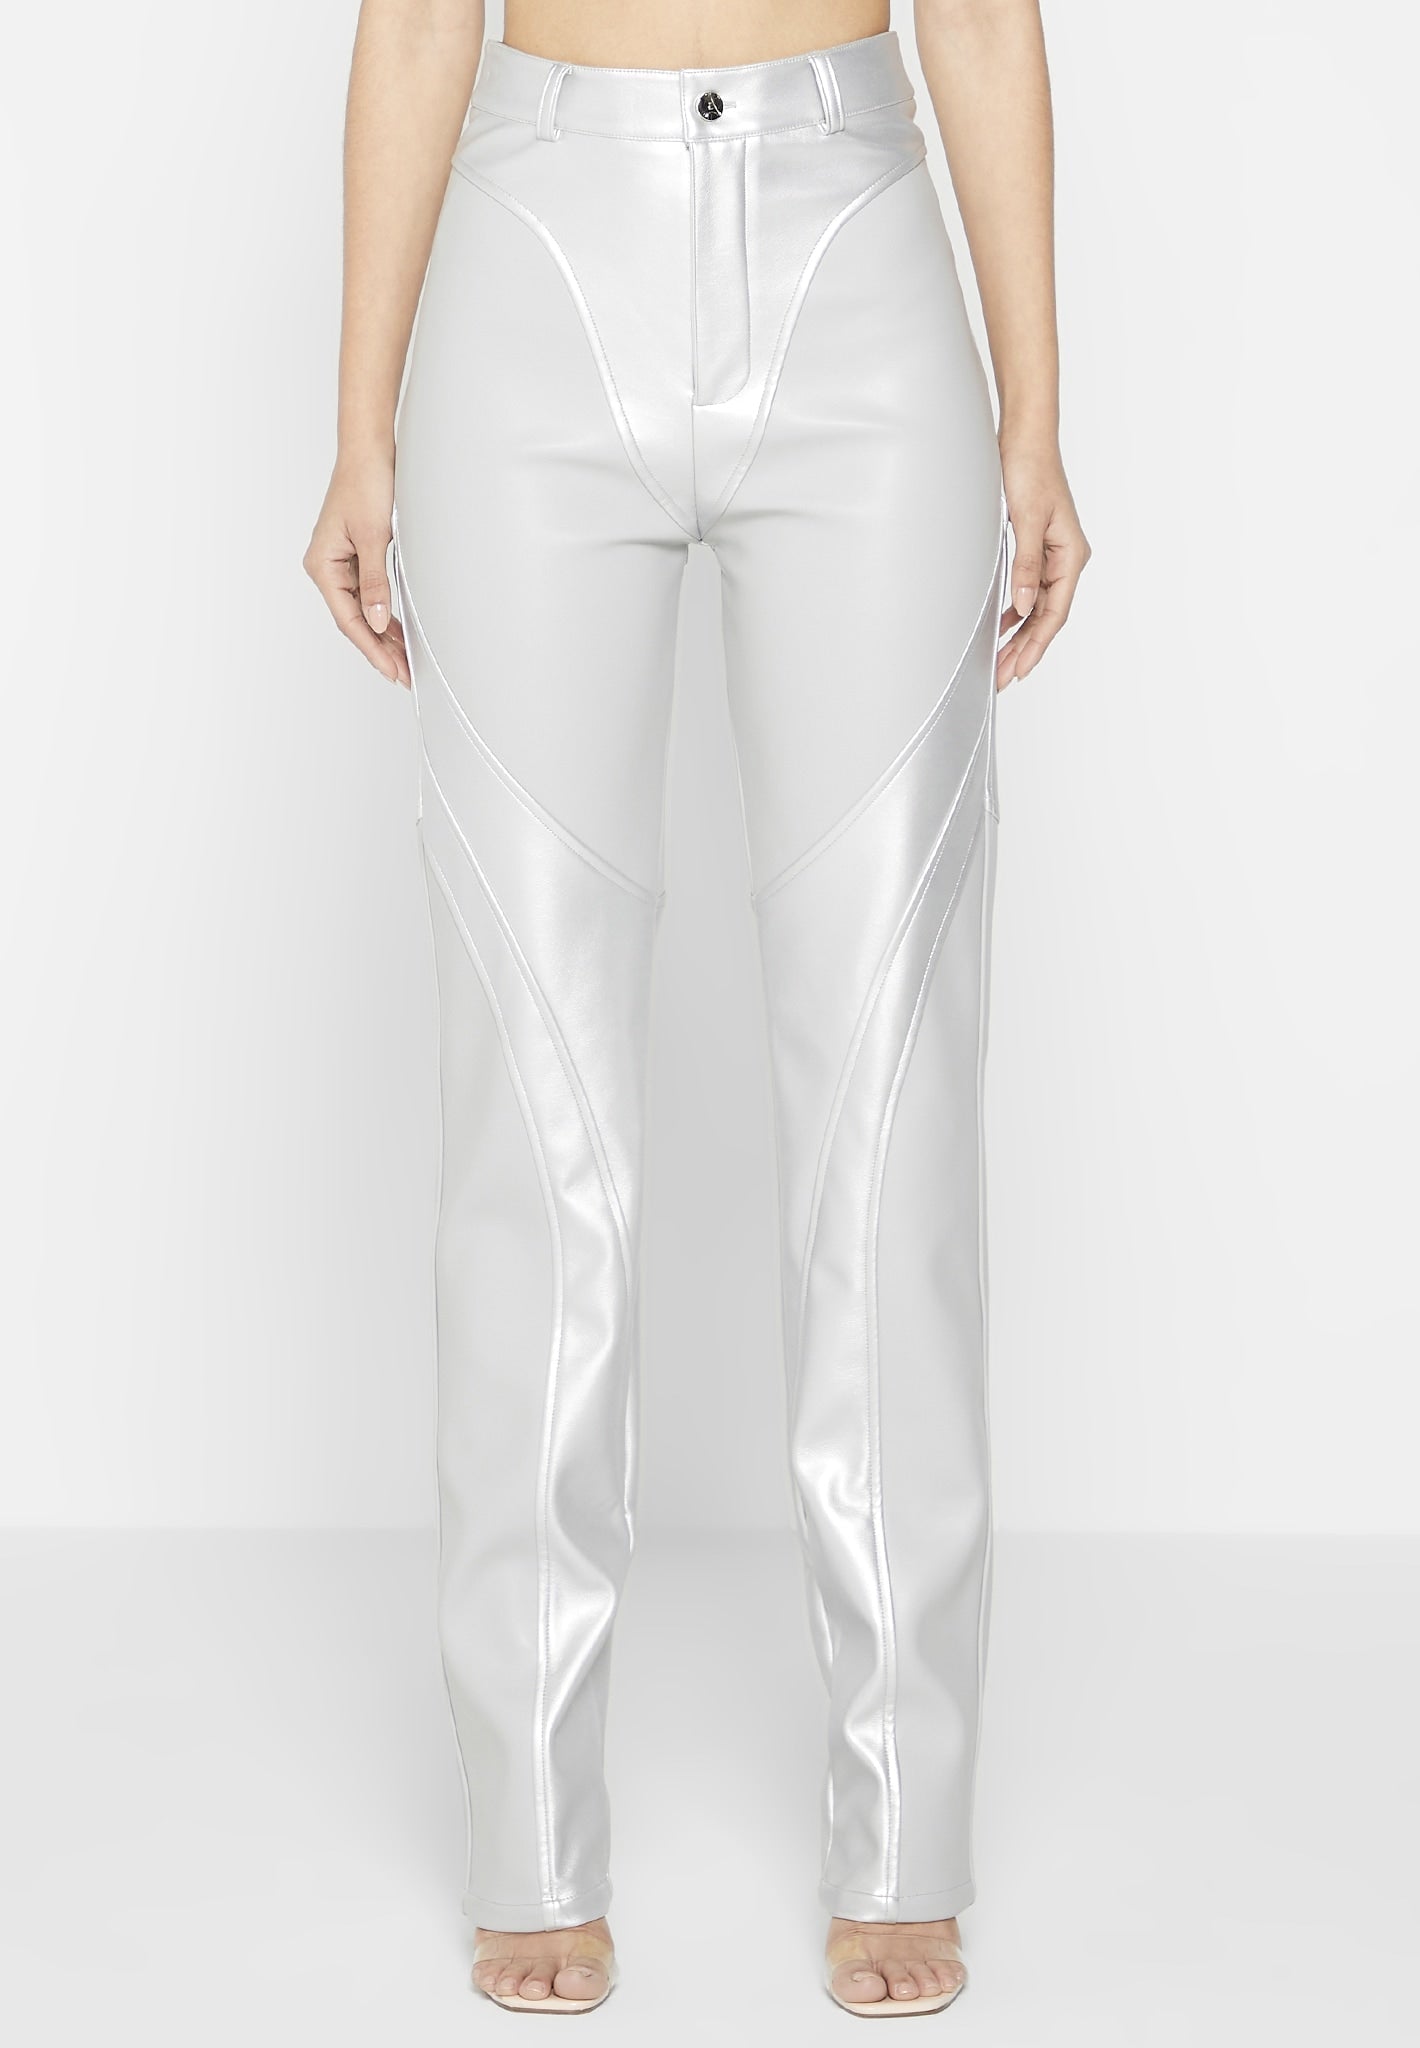 Silver Pu High Waist Ruched Flared Pants